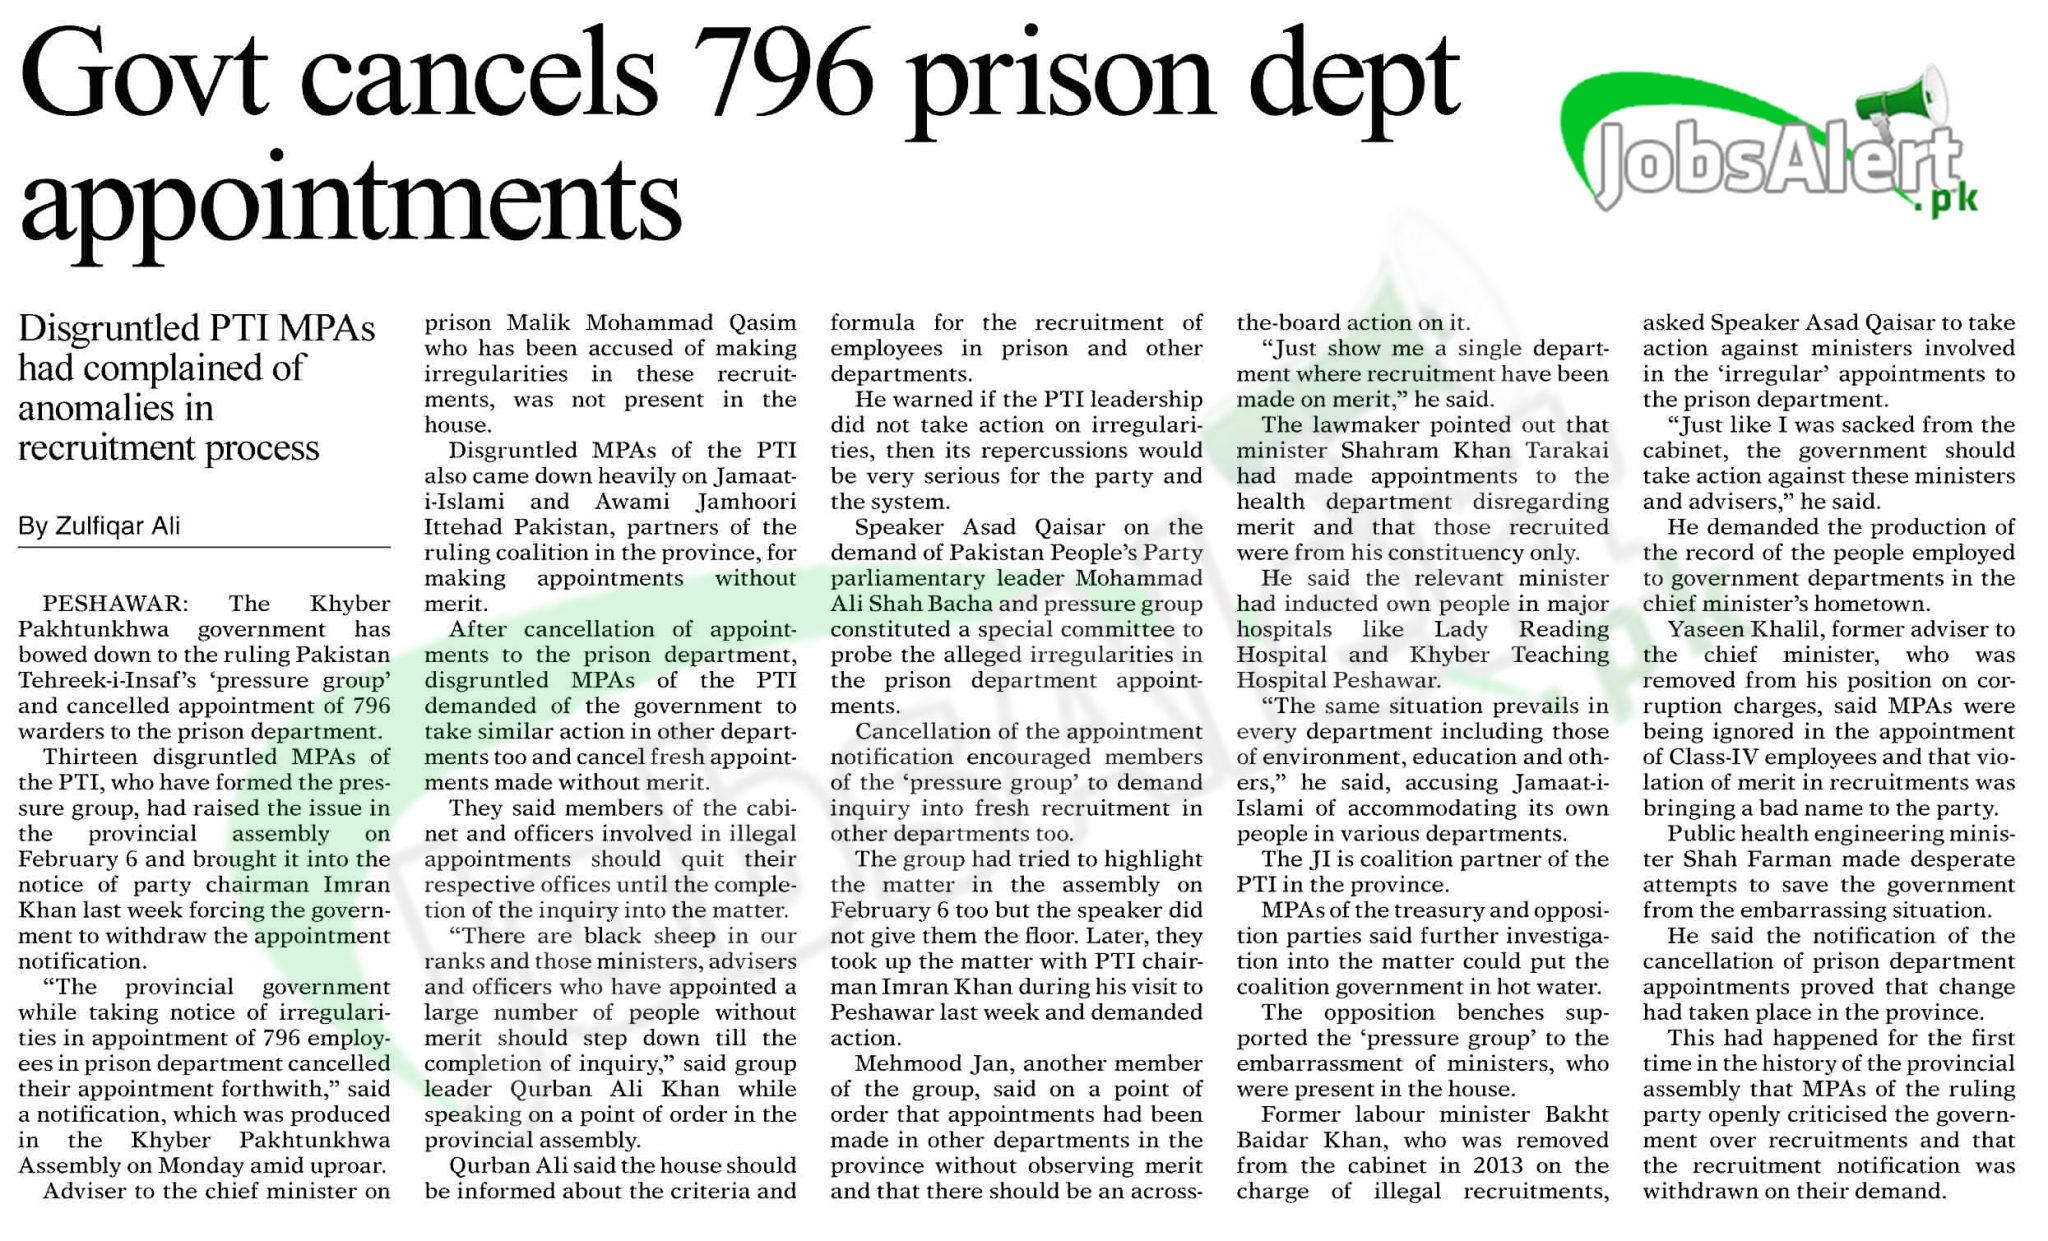 KPK Govt has cancelled 796 jobs appointments